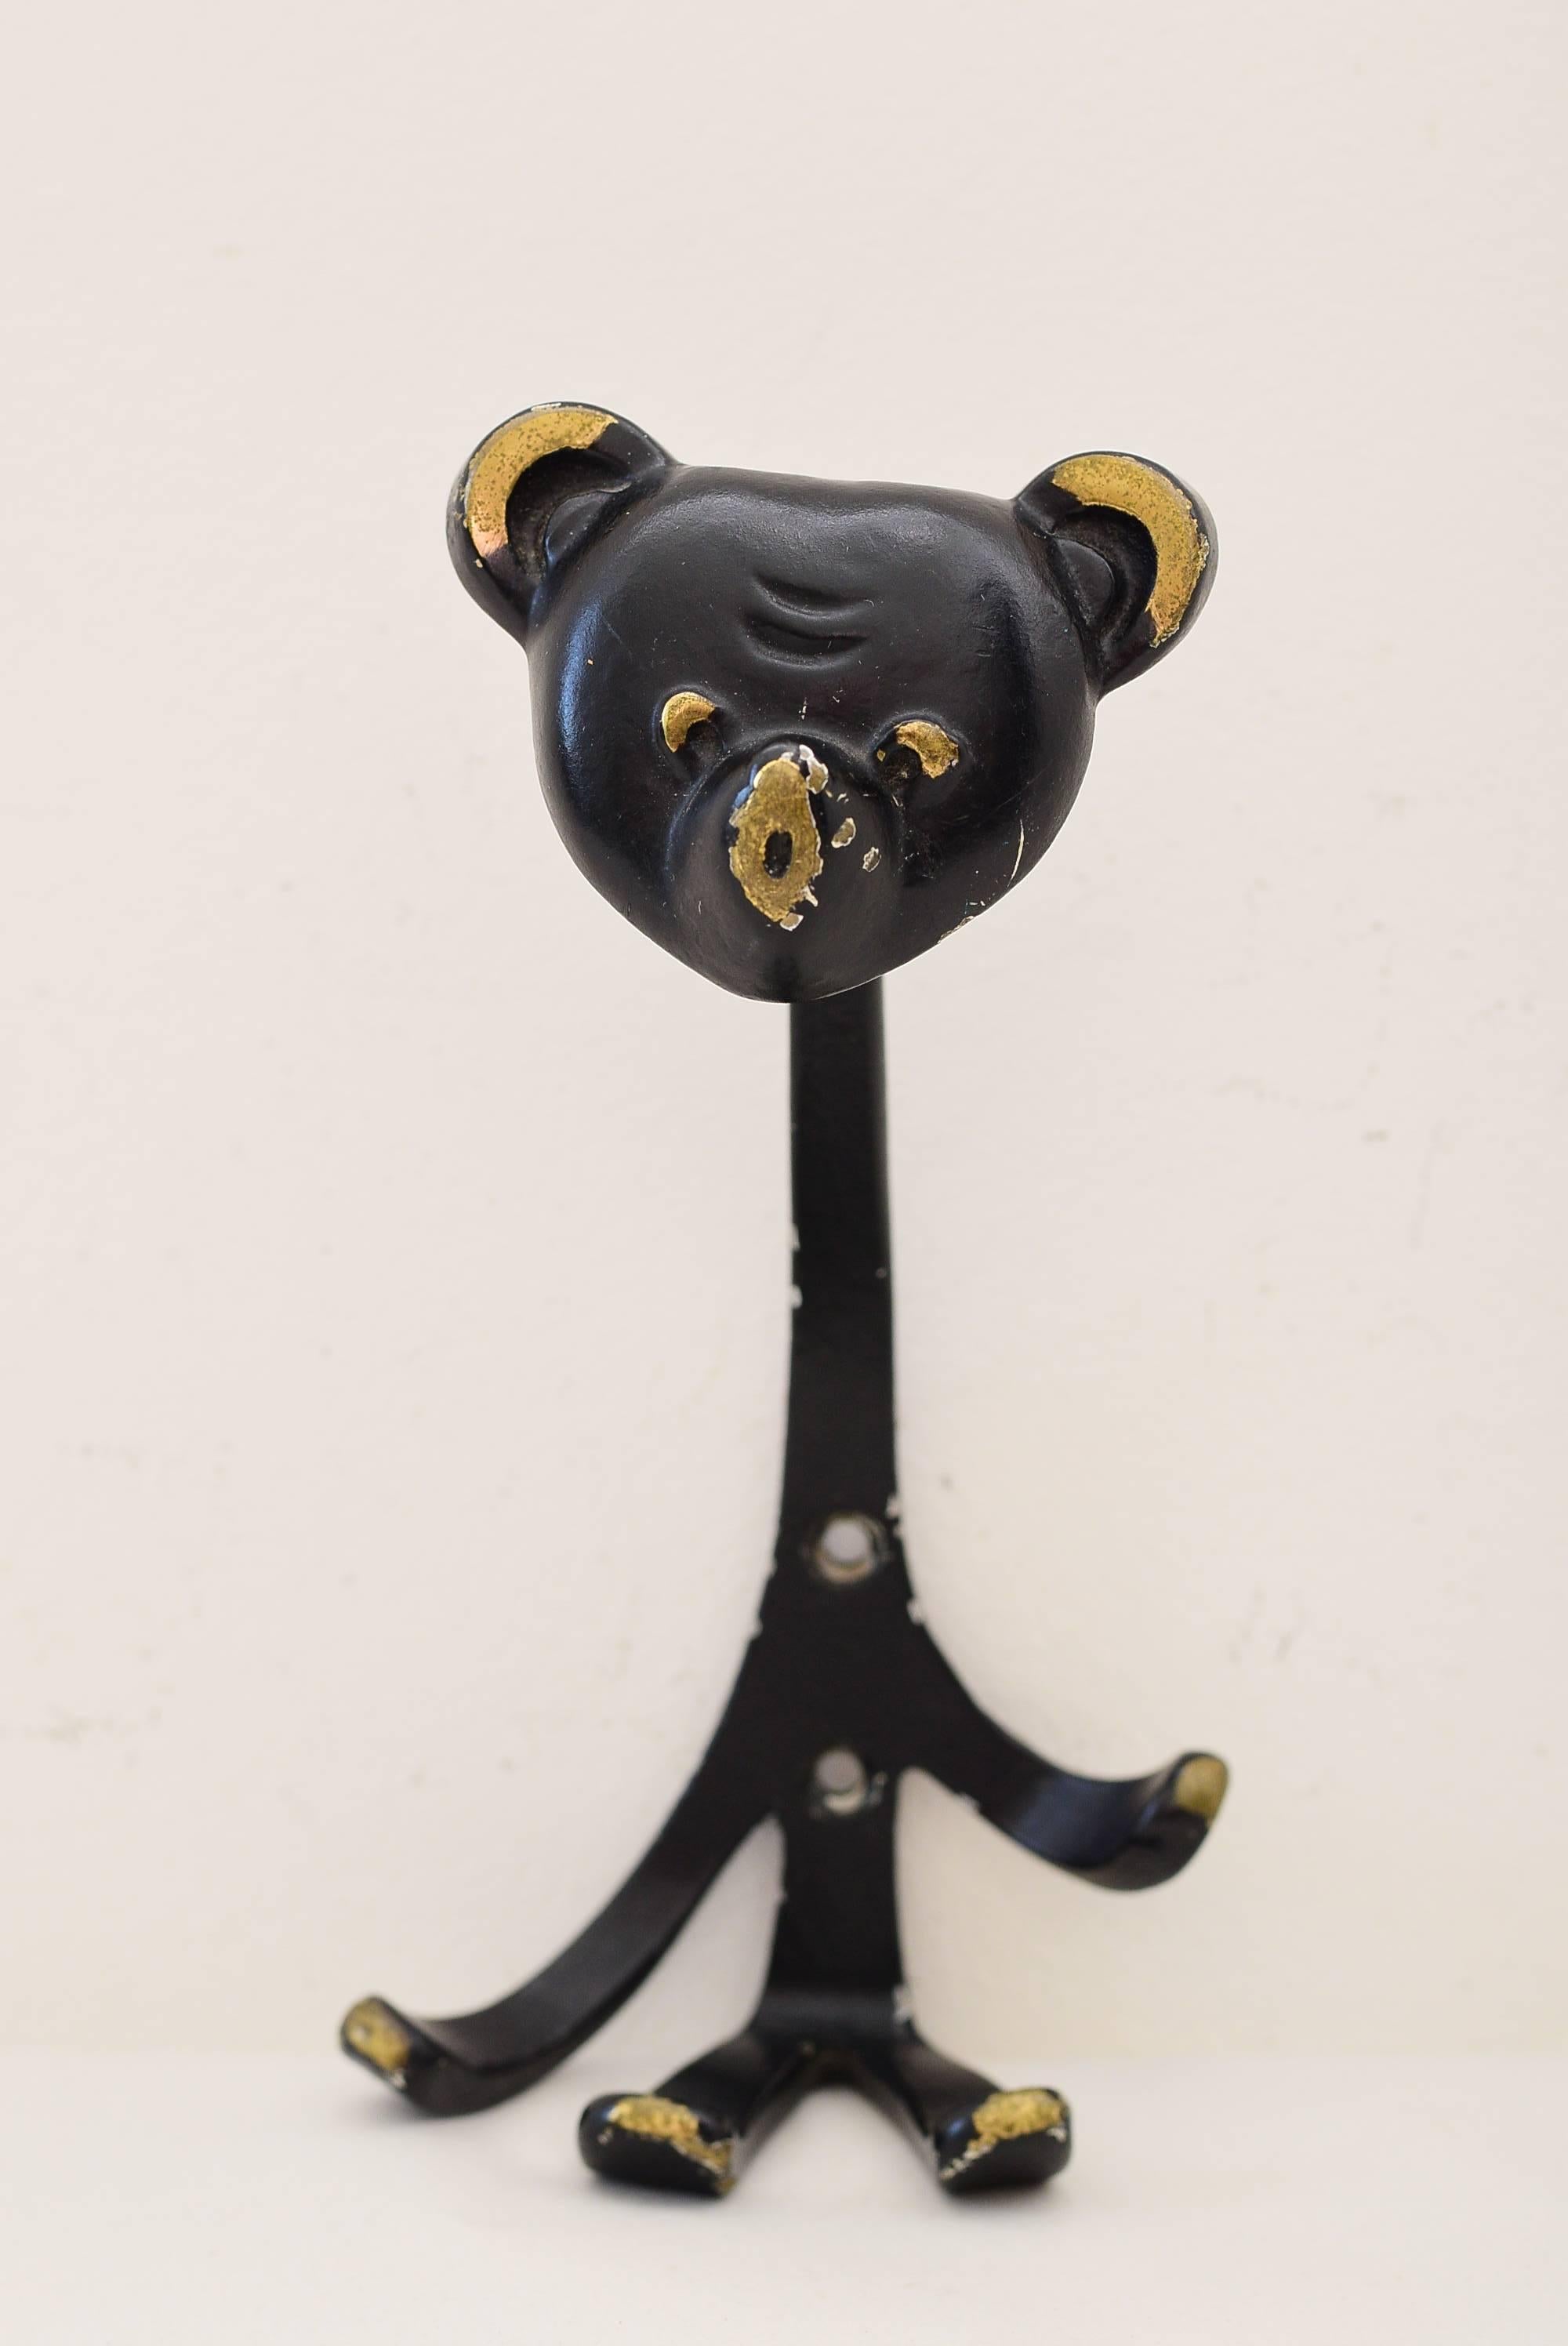 Two Walter Bosse rabbit and bear Mid-Century wall hooks, brass, Austria, 1950s.
Original condition.

The height of the rabbit is: 17cm.
Wide: 9 cm.

The height of the bear is: 16cm.
Wide: 9 cm.